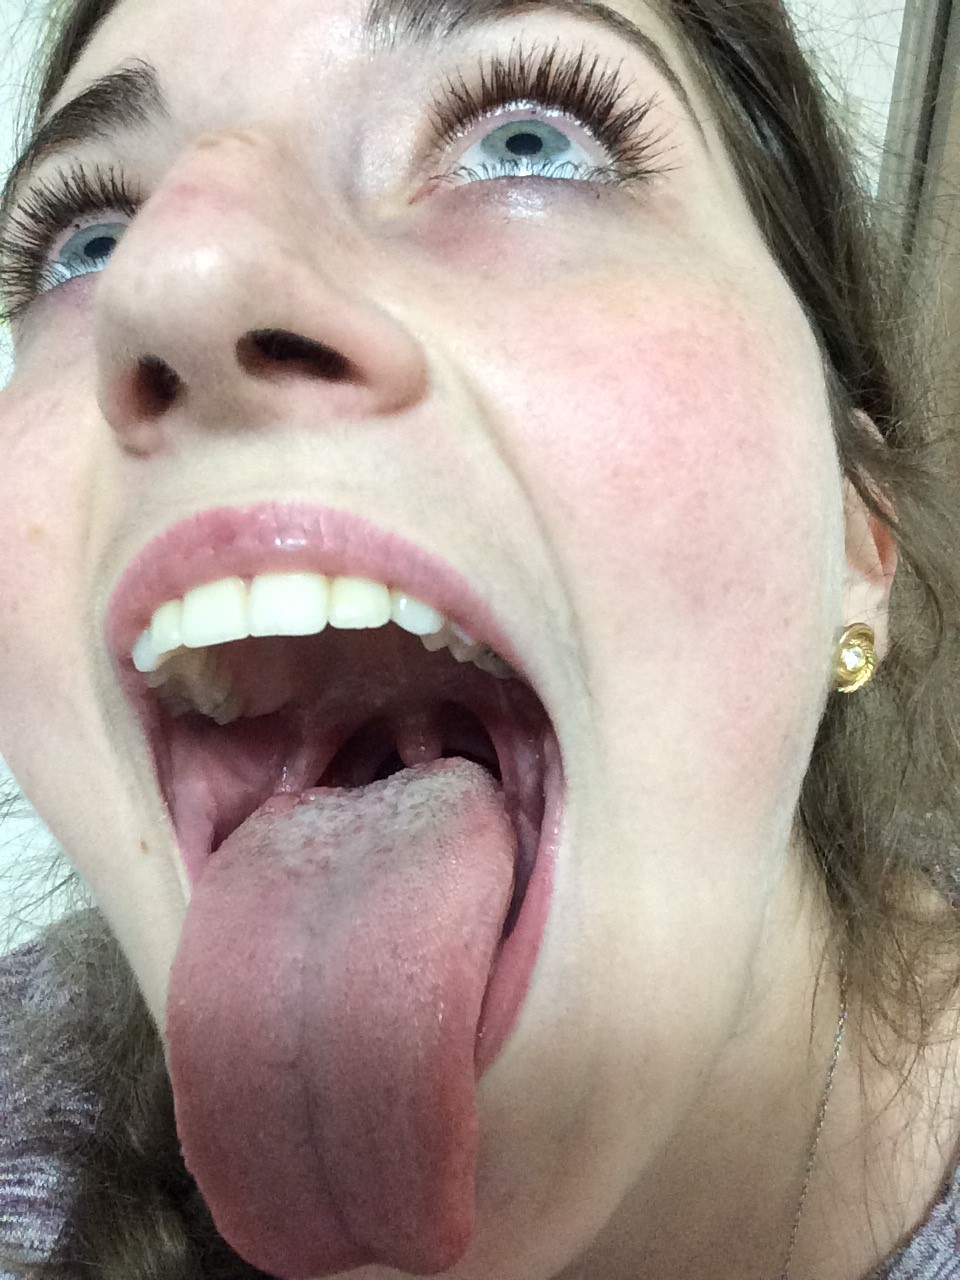 Amateur Amazing Head Cum In Mouth And Swallow.